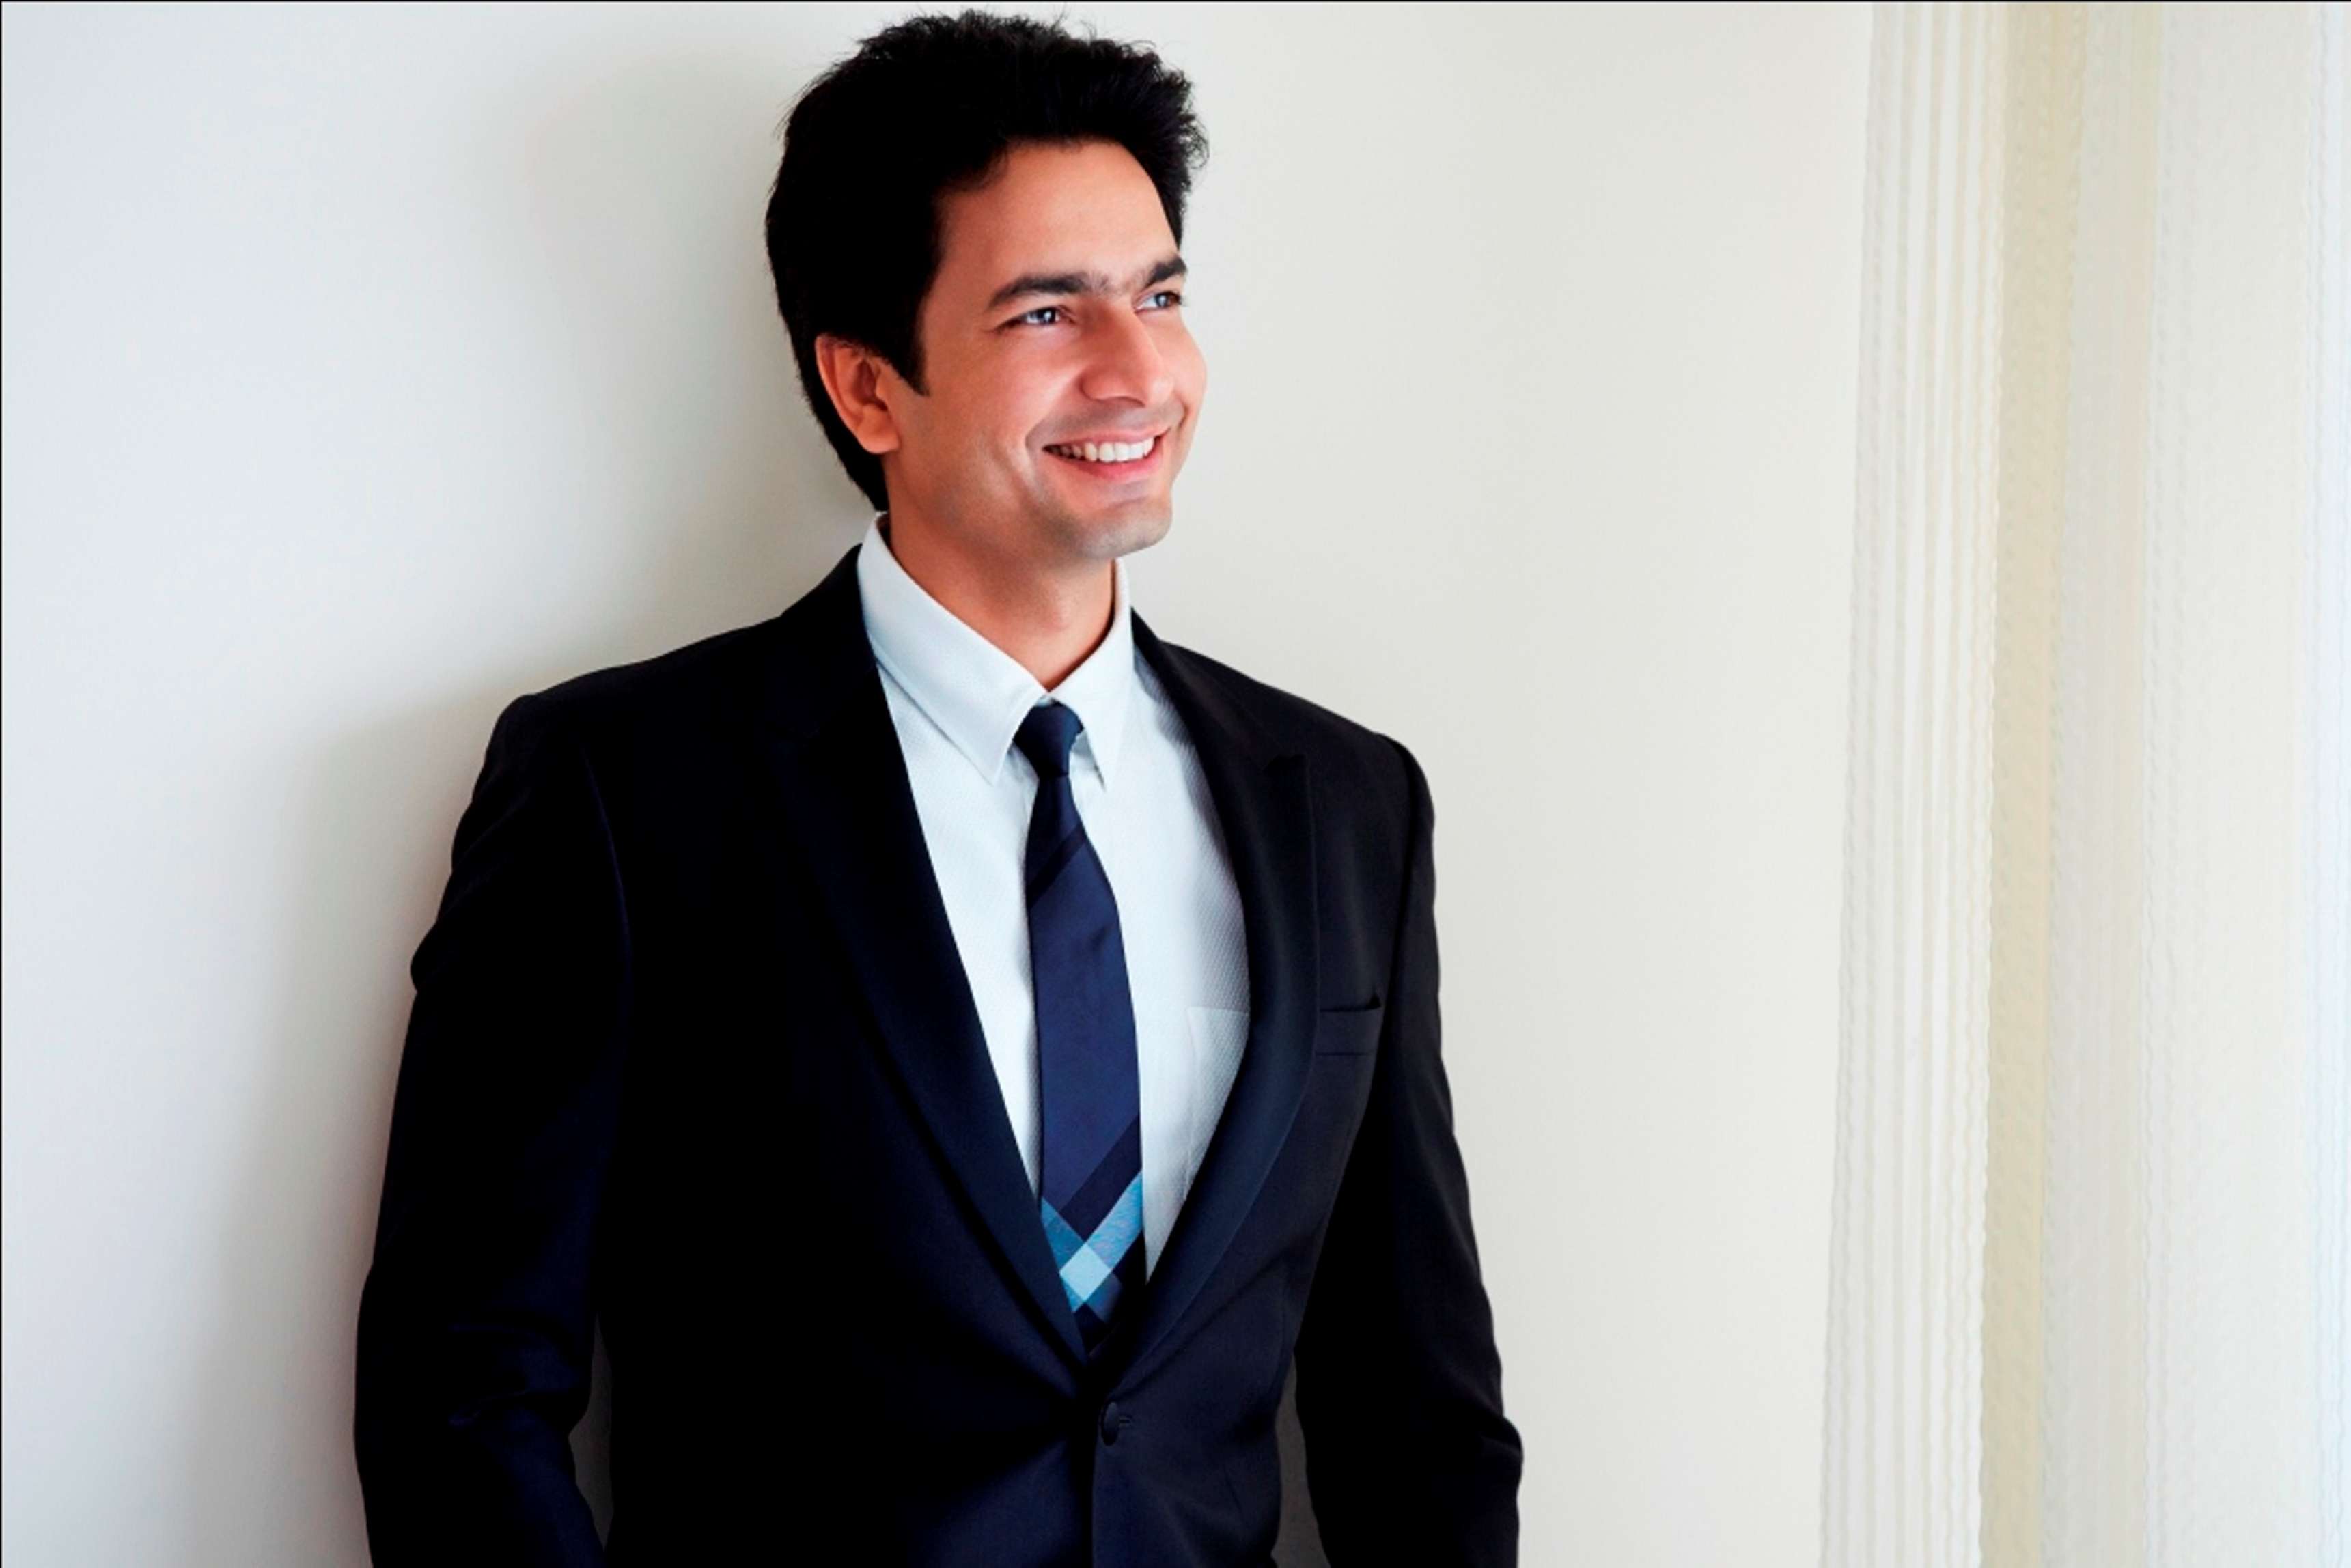 Here's how Micromax co-founder Rahul Sharma plans to beat Chinese rivals